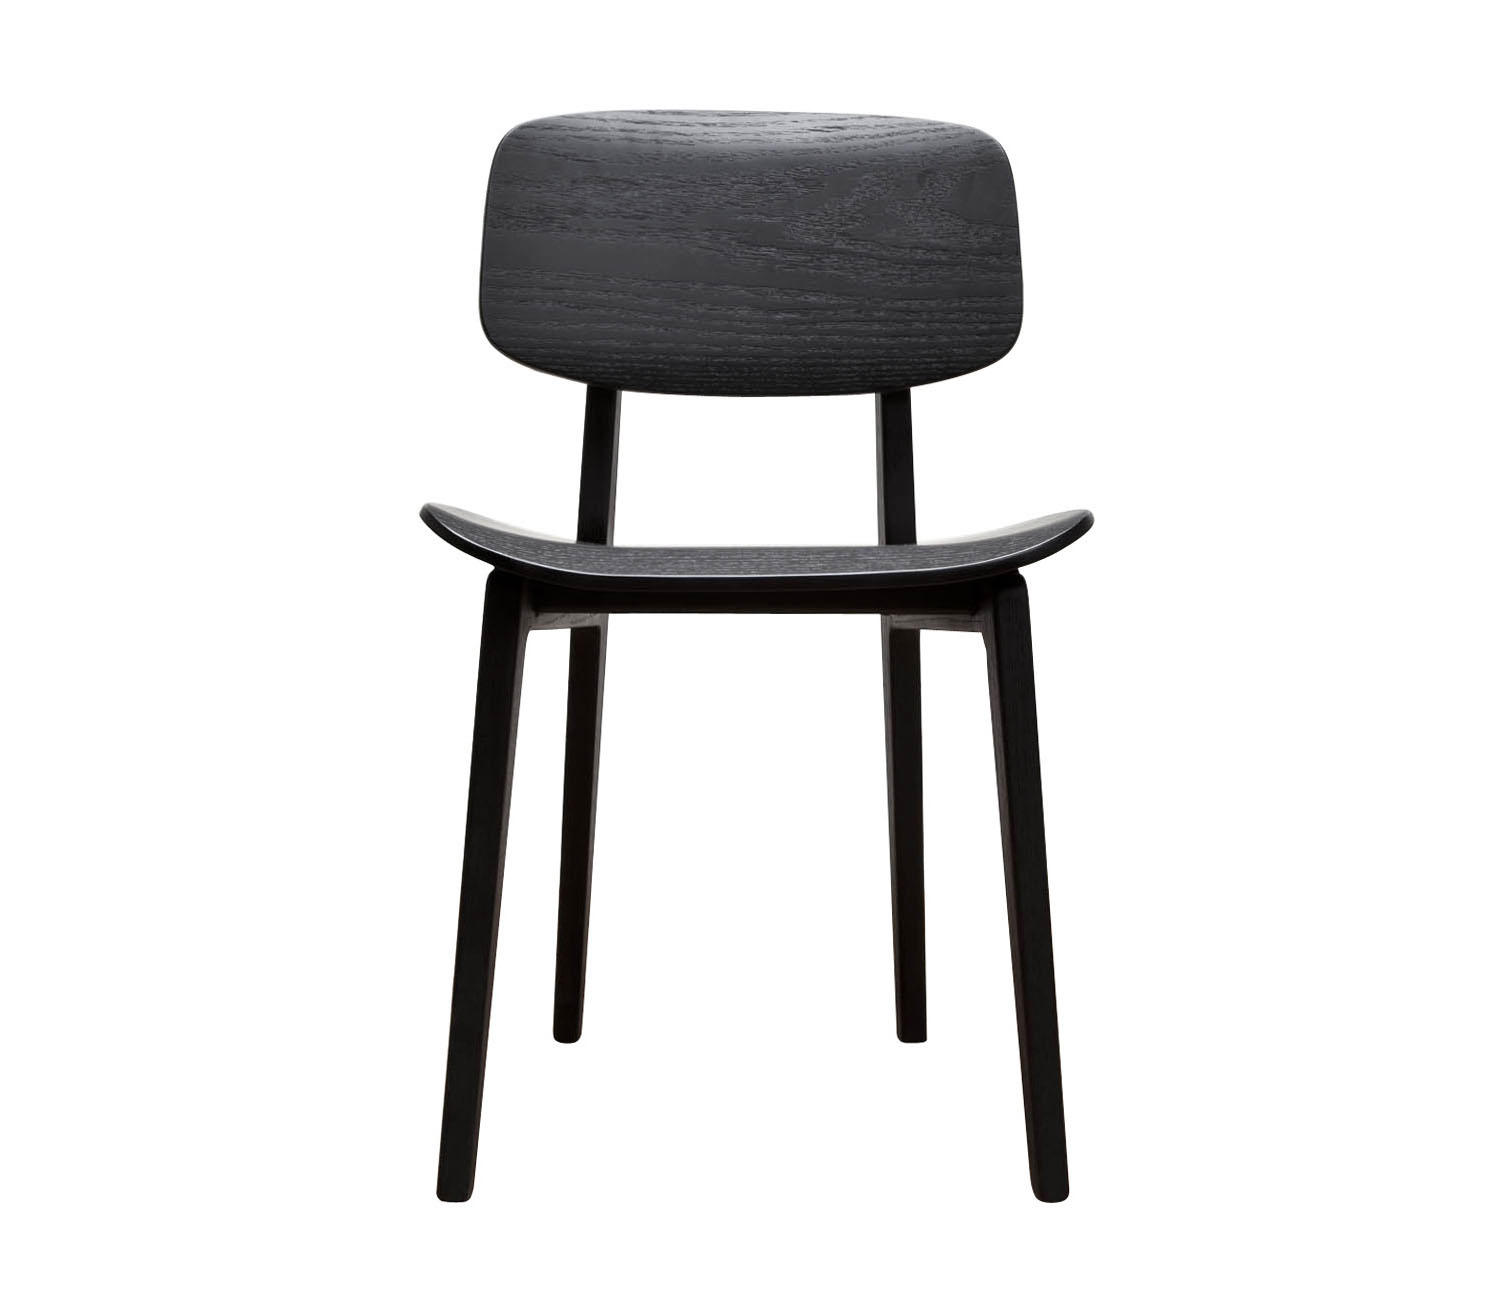 NY11 dining chair & designer furniture | Architonic